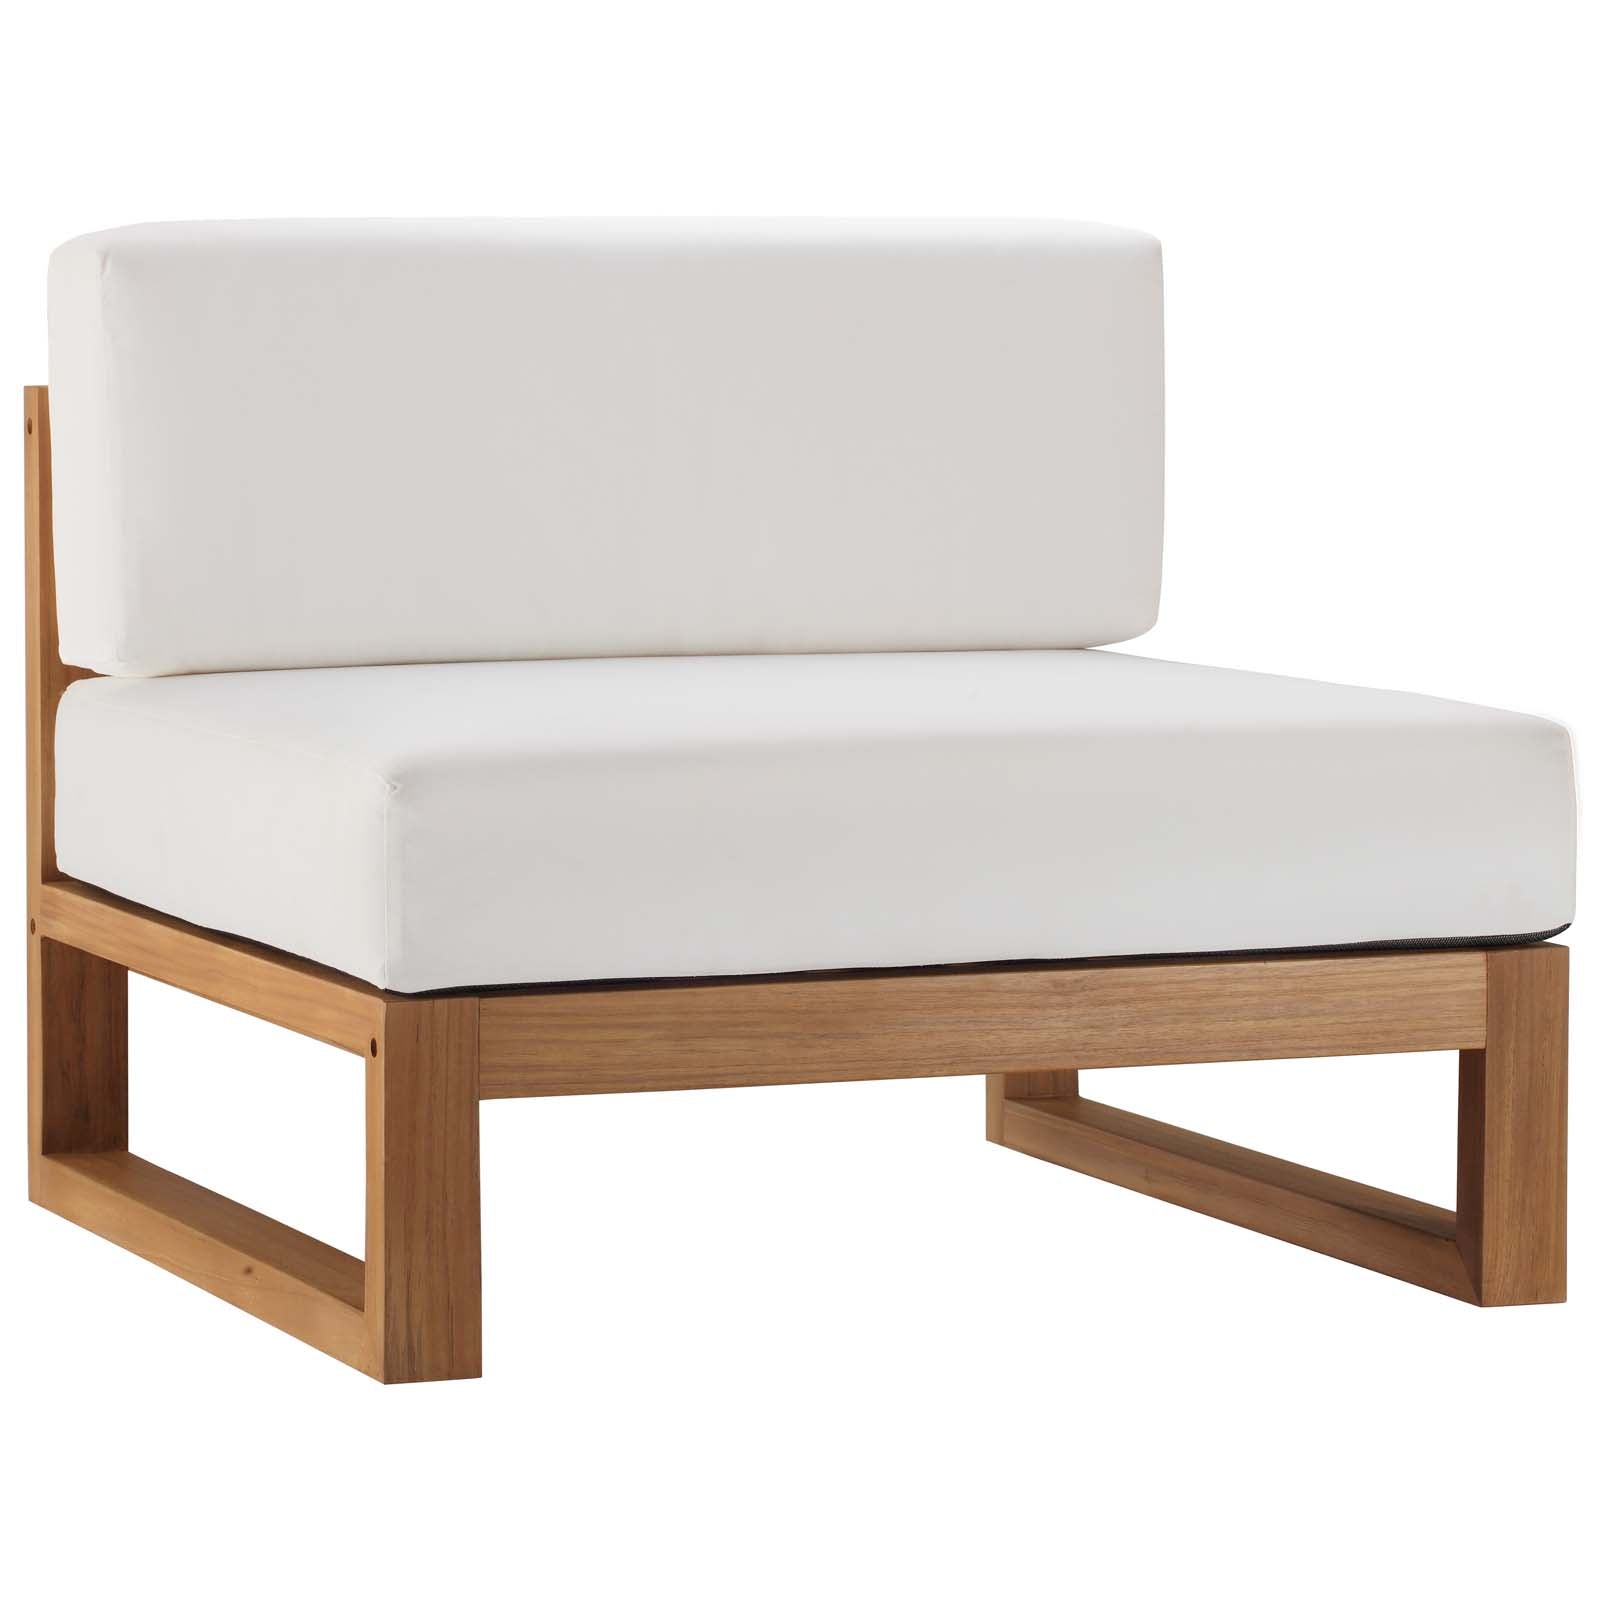 Modway Outdoor Conversation Sets - Upland Outdoor Patio Teak Wood 5-Piece Sectional Sofa Set Natural White